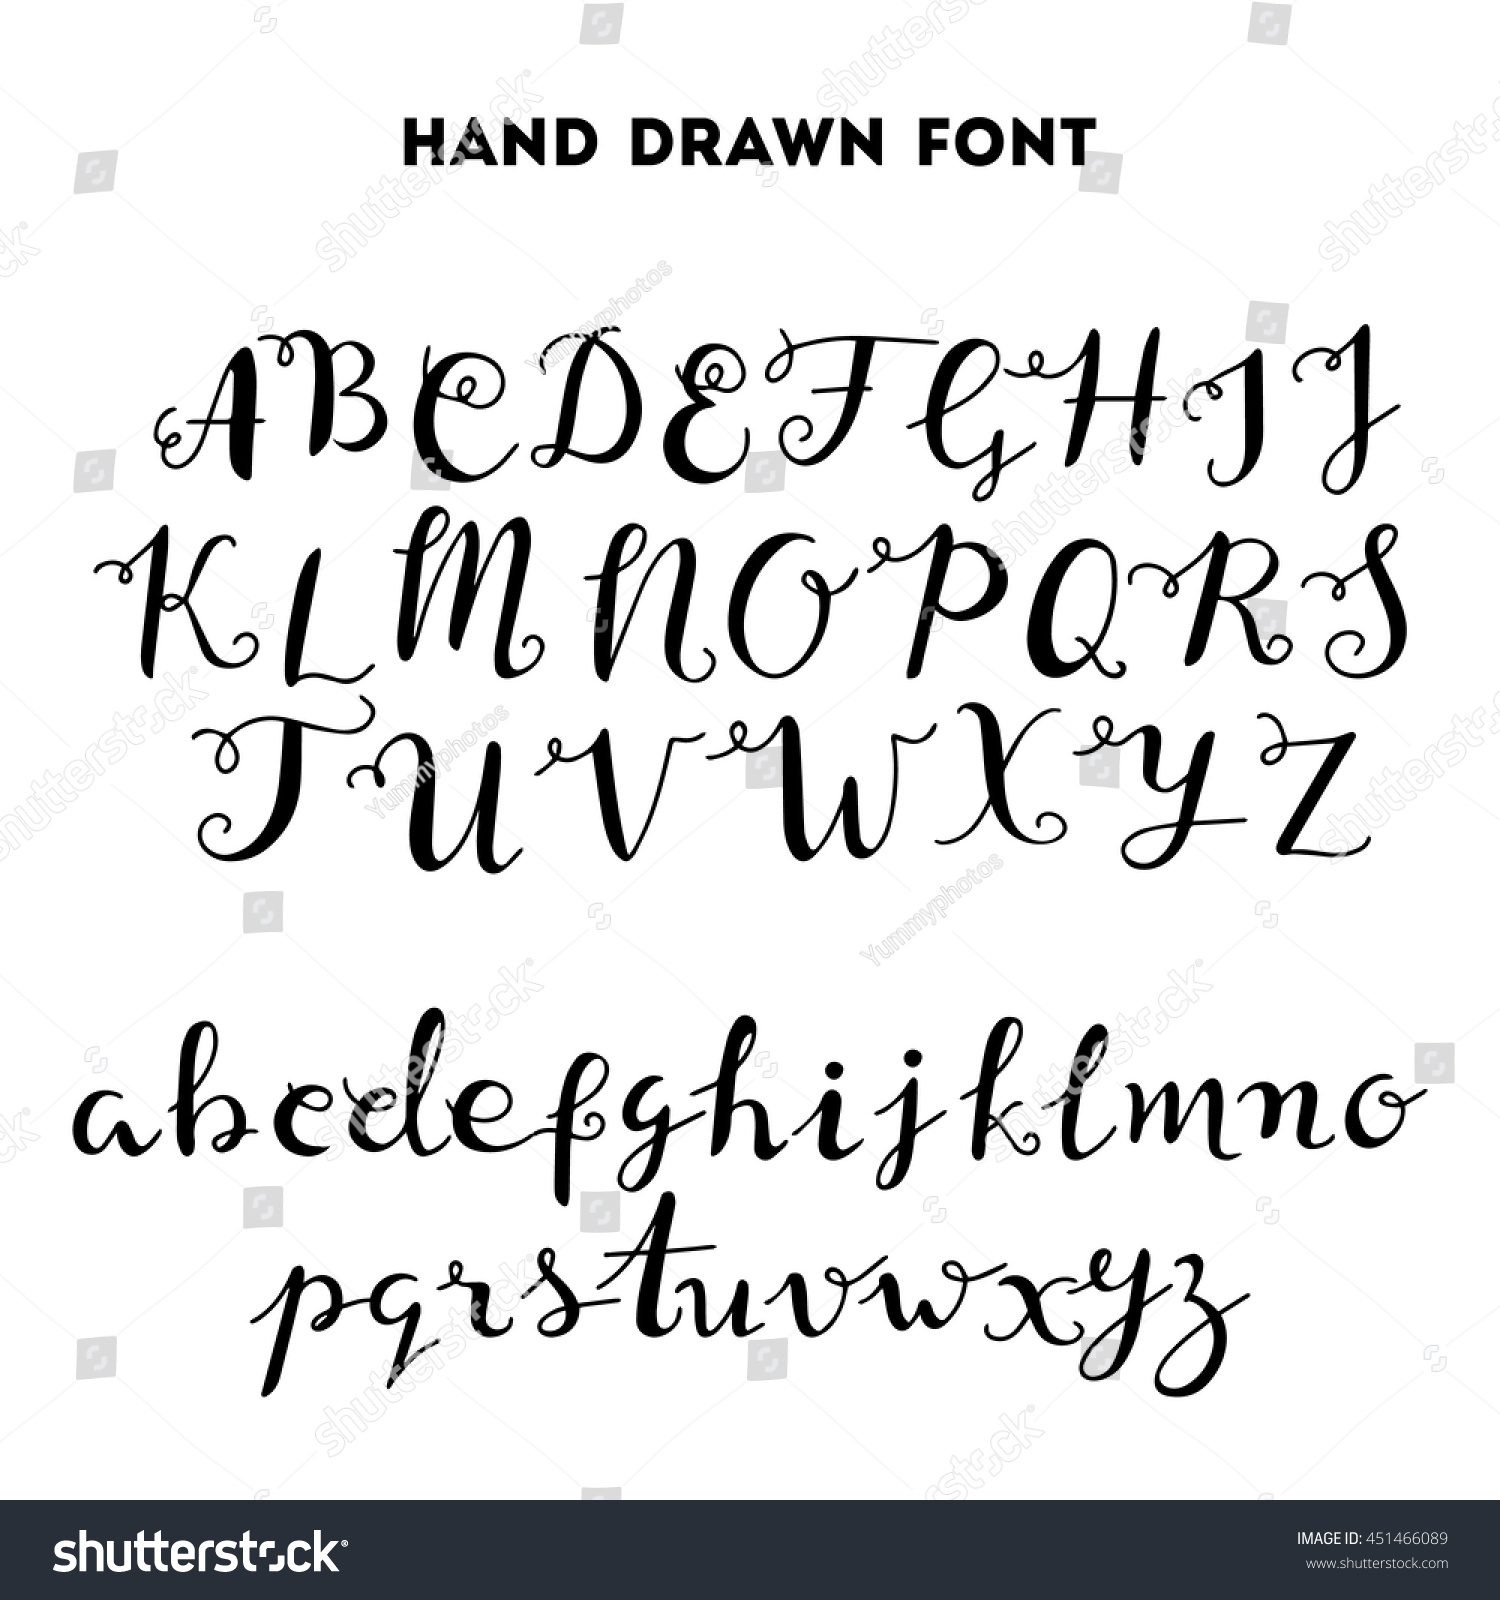 Hand drawn calligraphy curly font - Royalty Free Stock Vector 451466089 ...